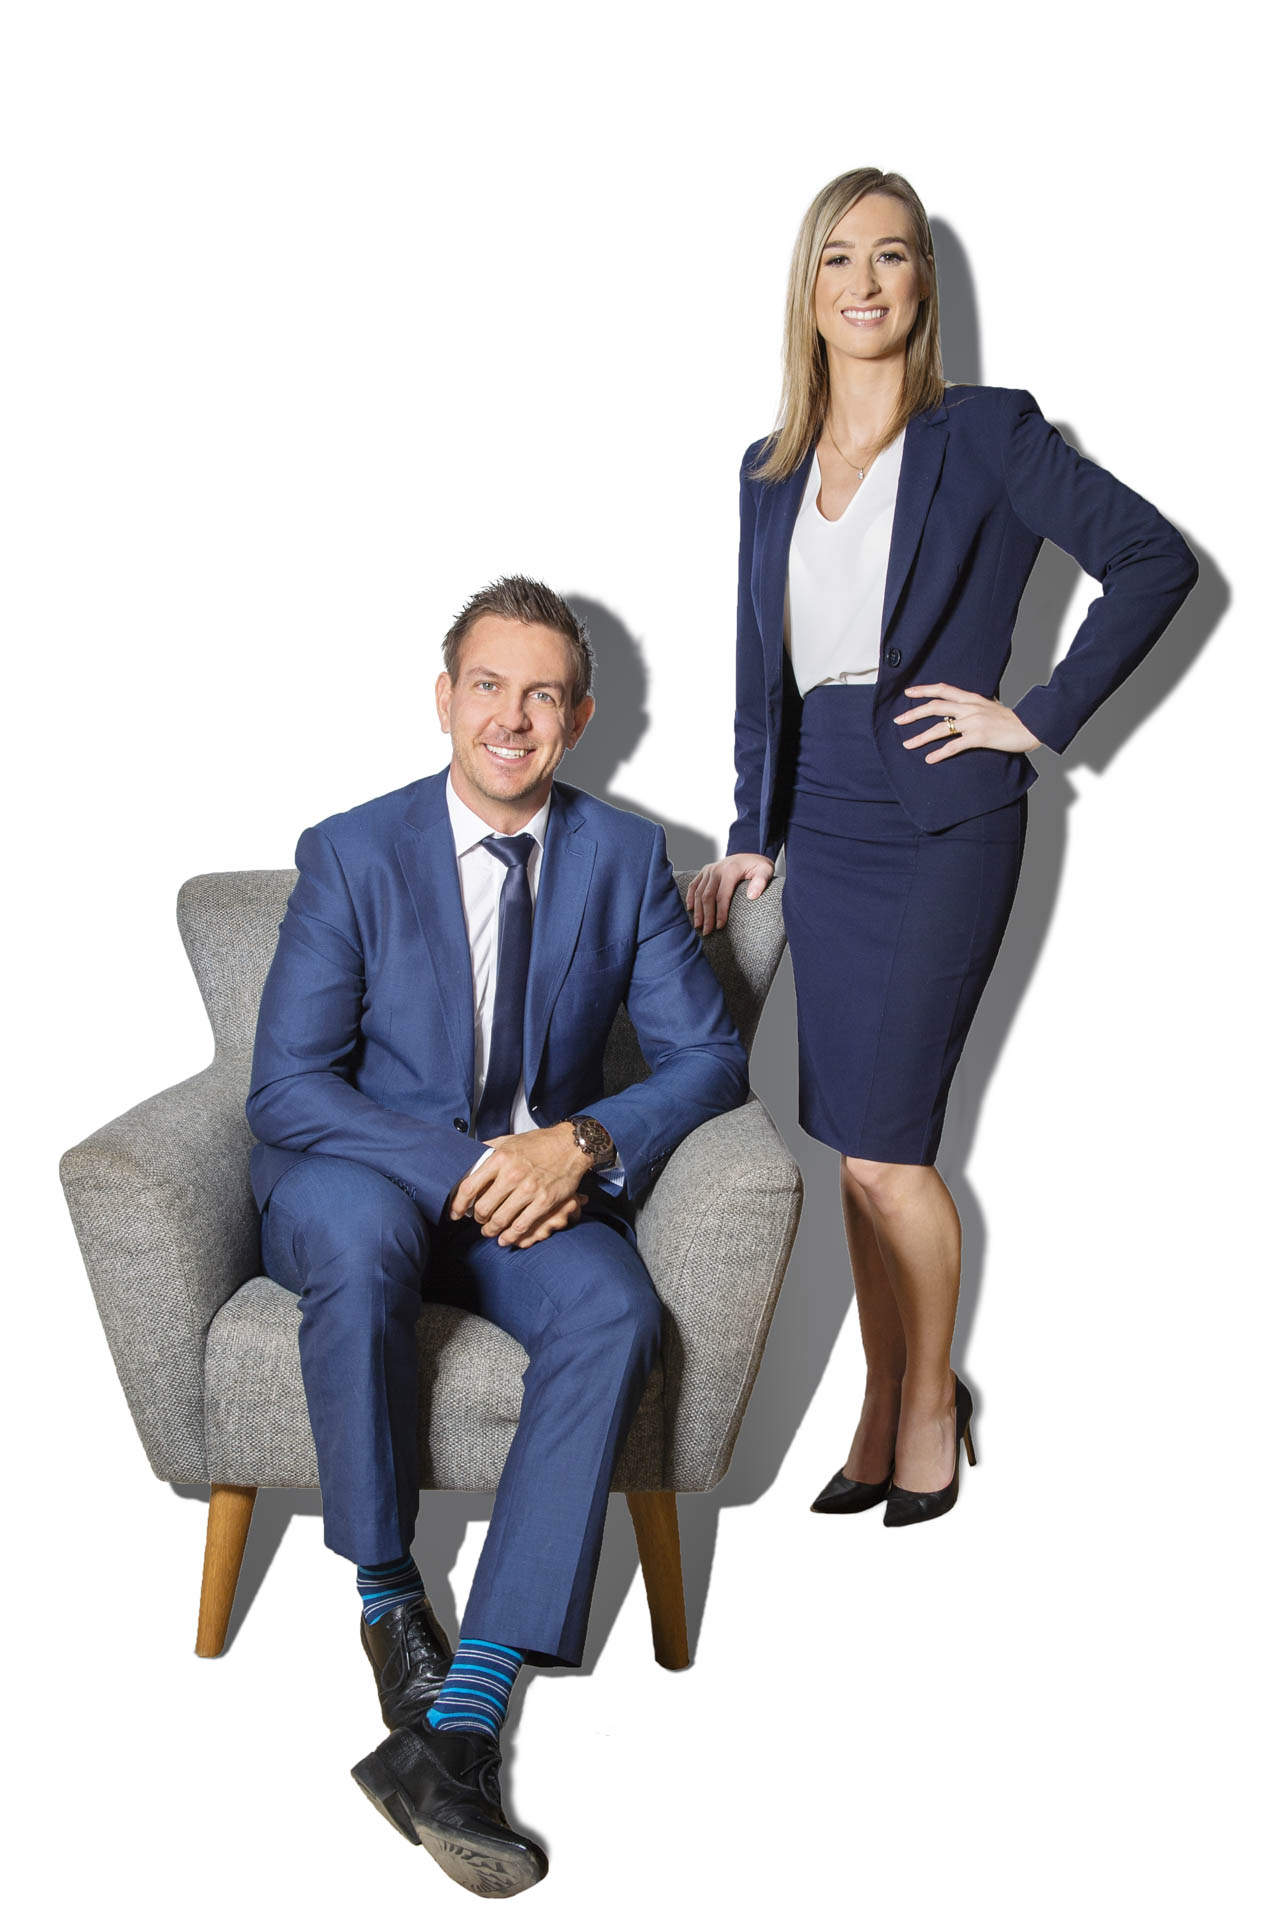 Corporate portraits of the team from Loan Market's Townsville office